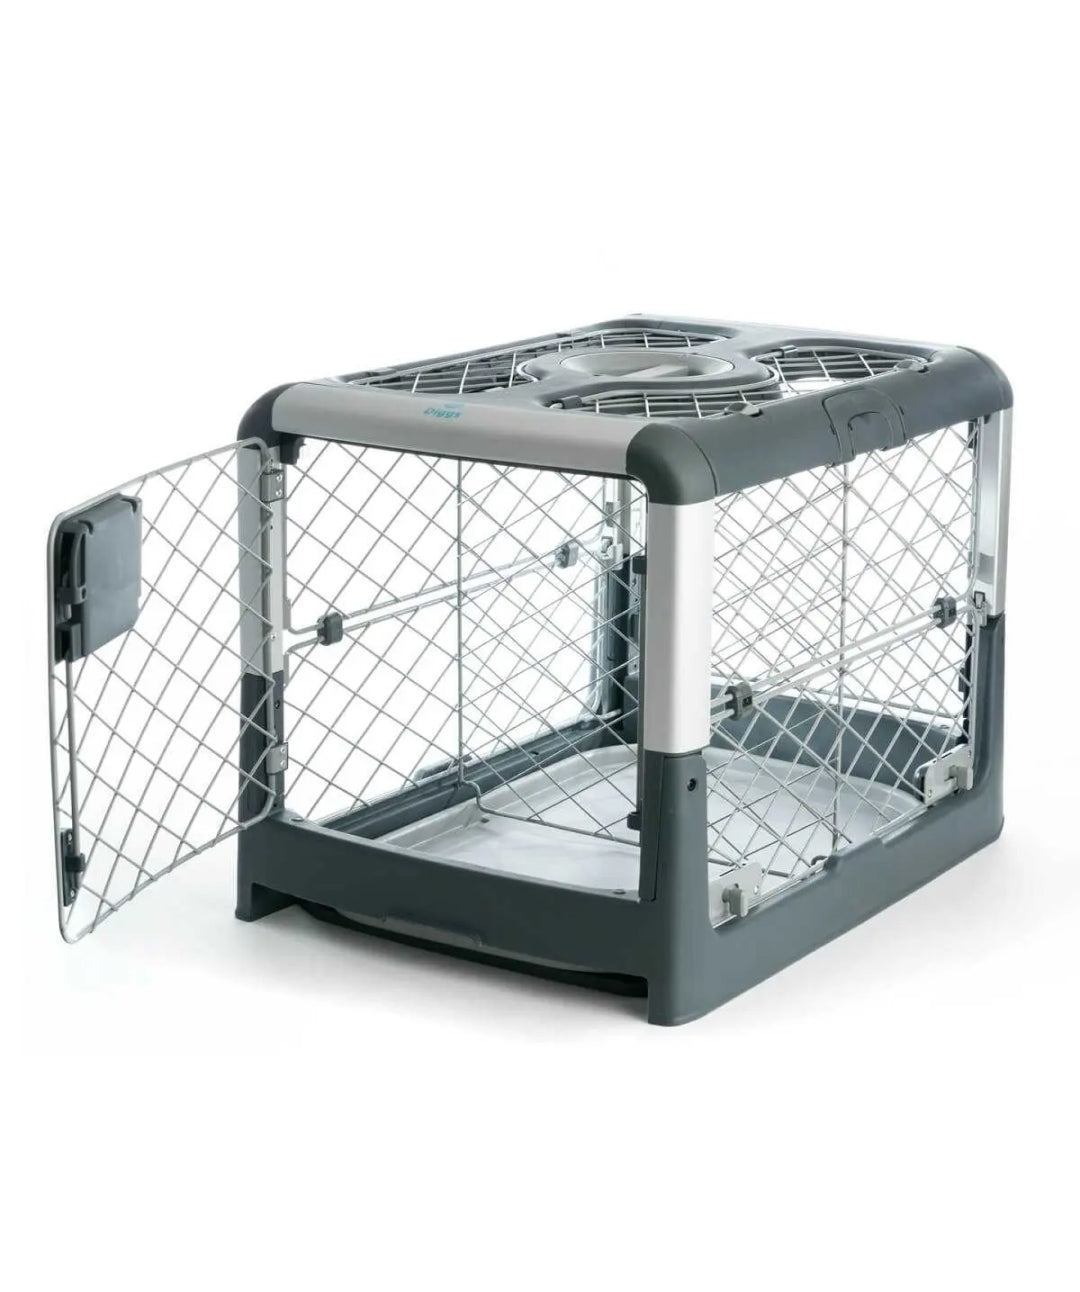 Portable & Collapsible Dog Crate – Pupvio